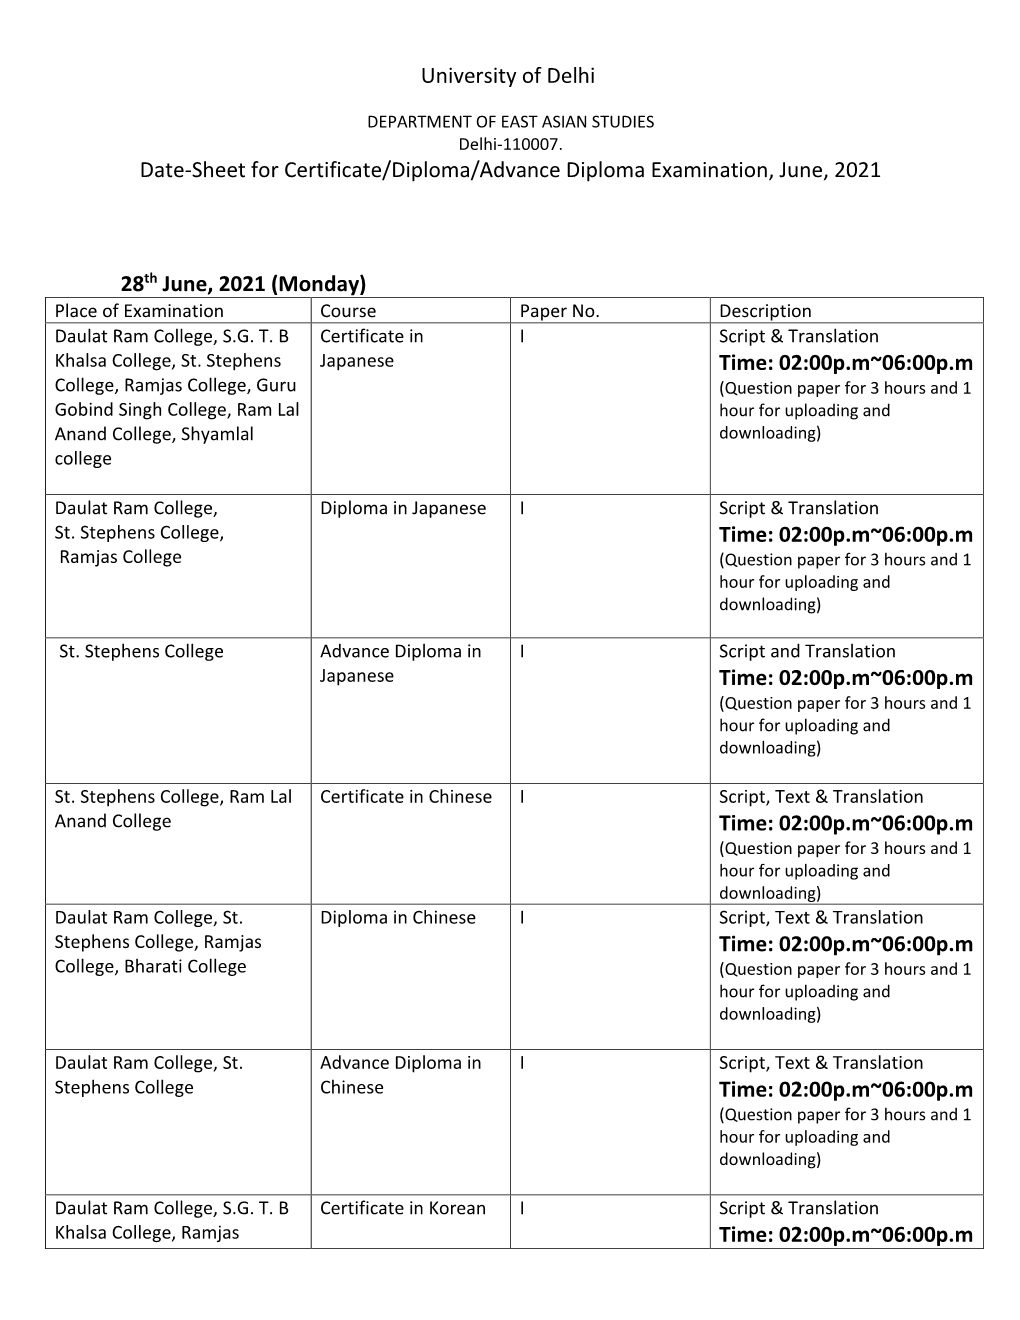 University of Delhi Date-Sheet for Certificate/Diploma/Advance Diploma Examination, June, 2021 28Th June, 2021 (Monday) Time: 02